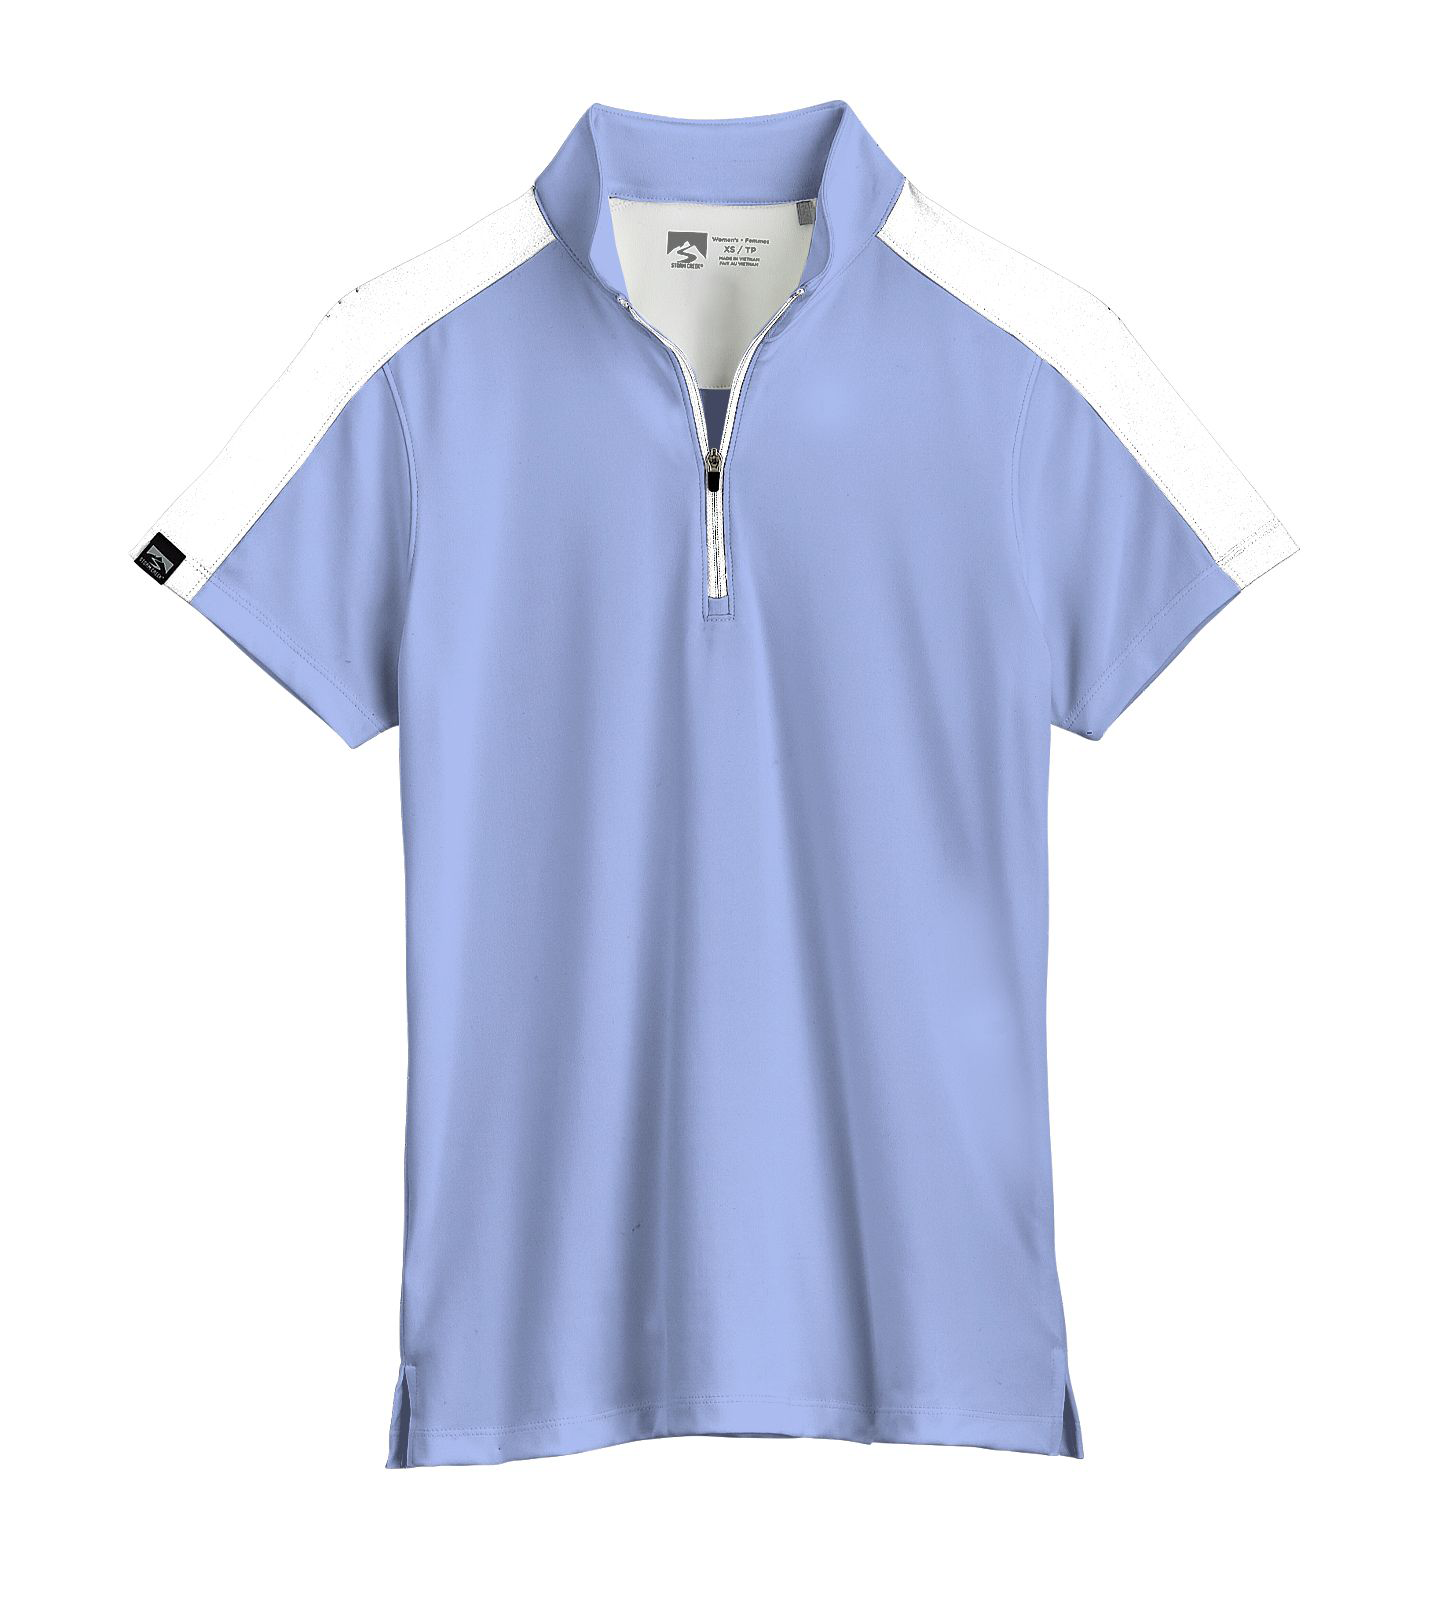 Storm Creek Activator Short-Sleeve Polo Shirt for Ladies - Peri Blue/White - XL